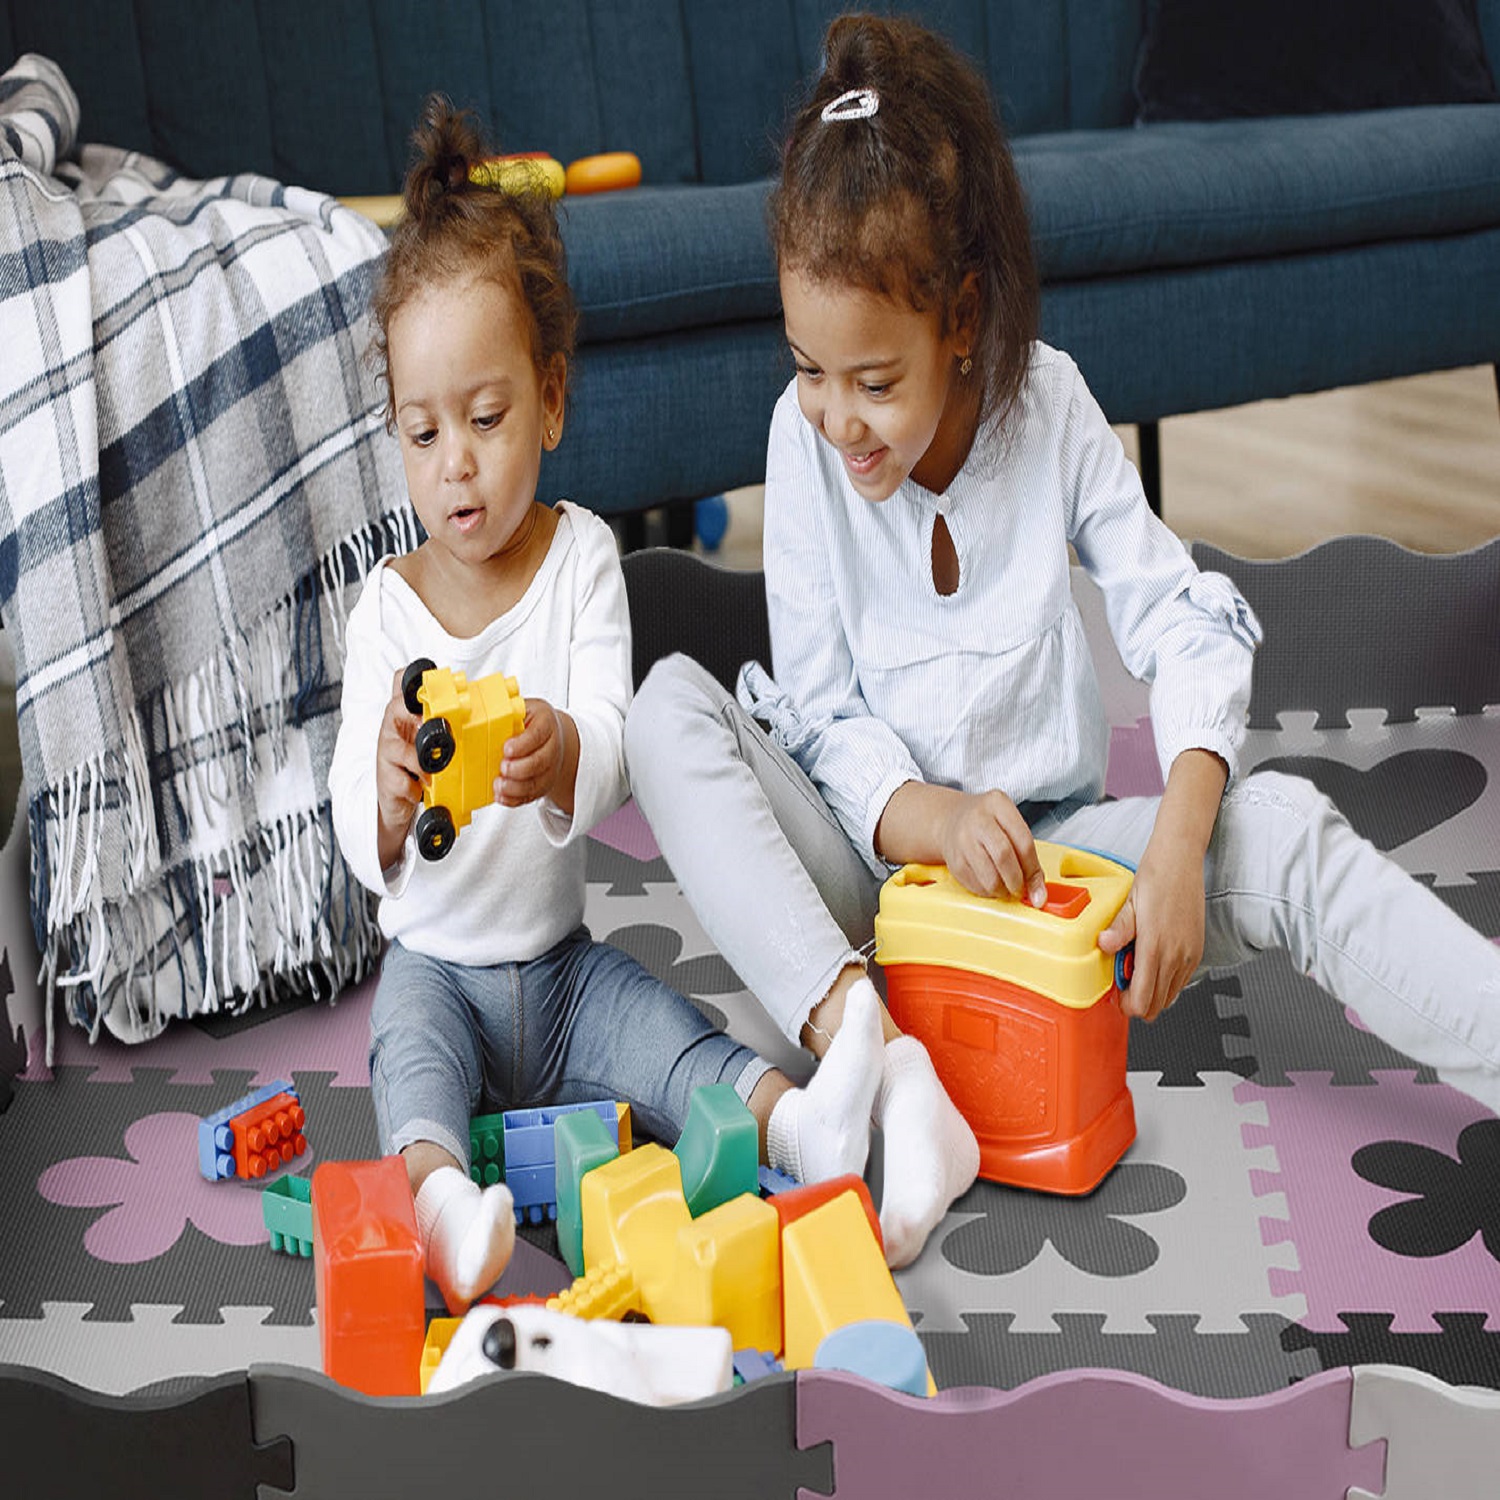 Cute little girls playing with toys on the floor near the couch